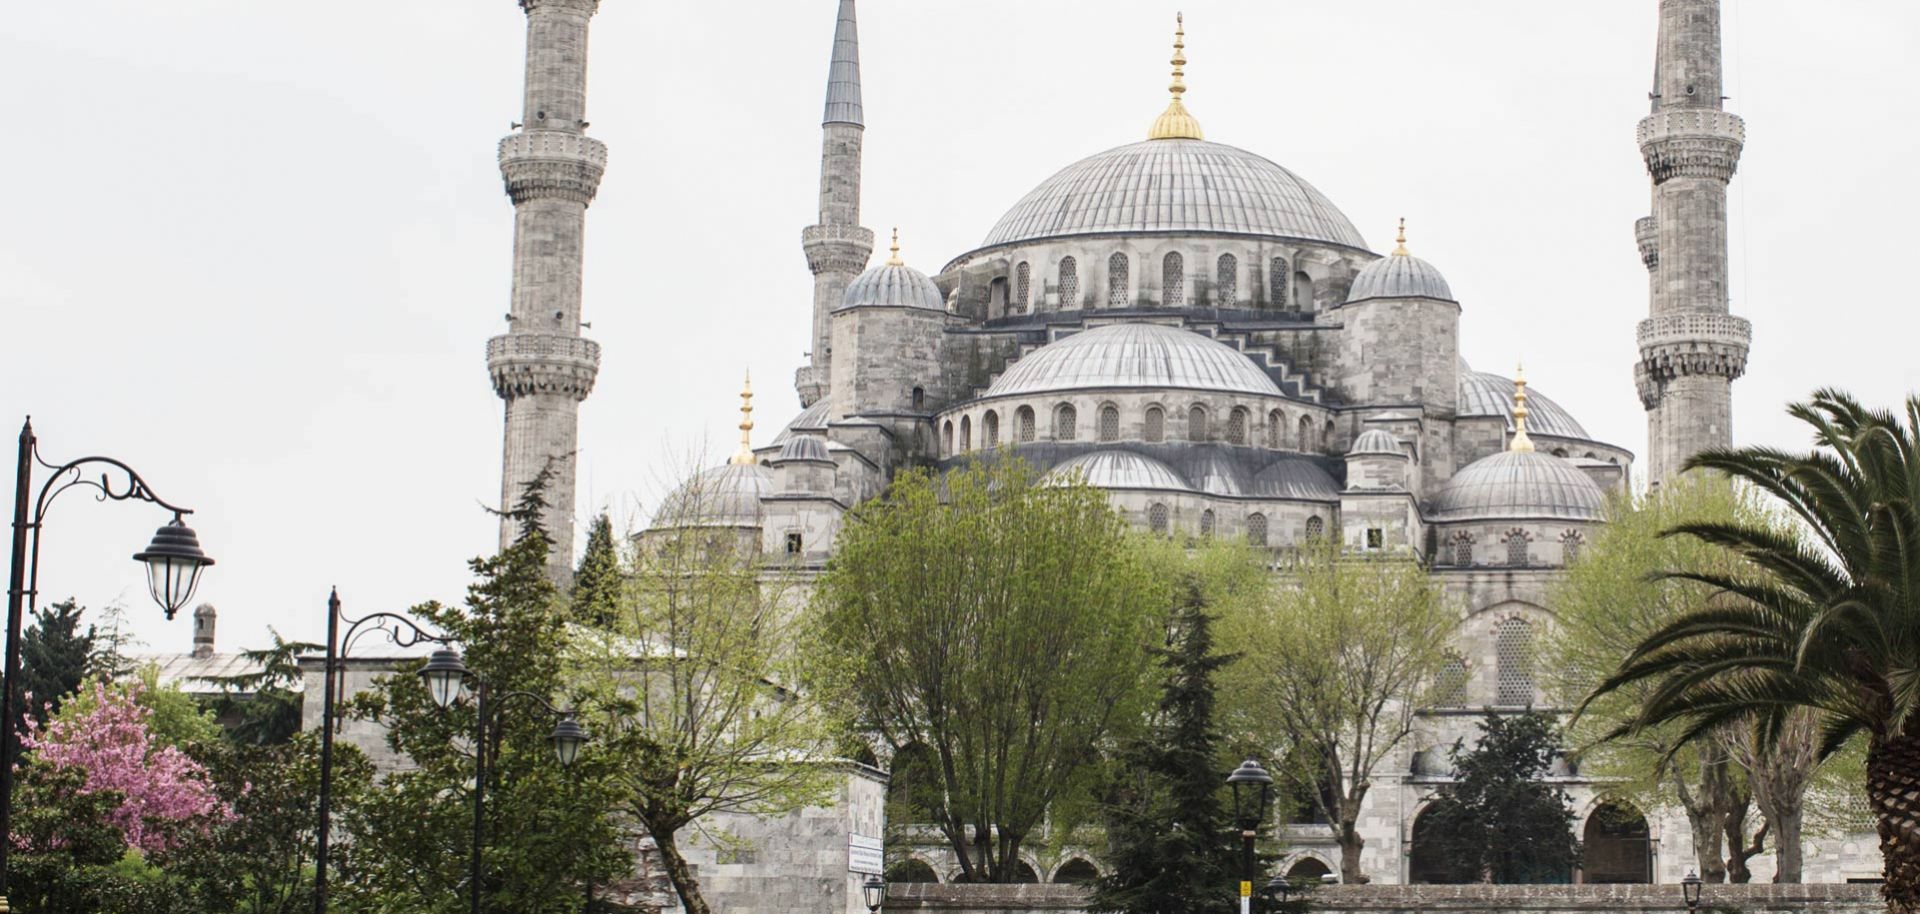 With proper information, situational awareness and mindset, travelers overseas can mitigate risks to their personal safety, even in a country such as Turkey, where the threat of terrorism is high.